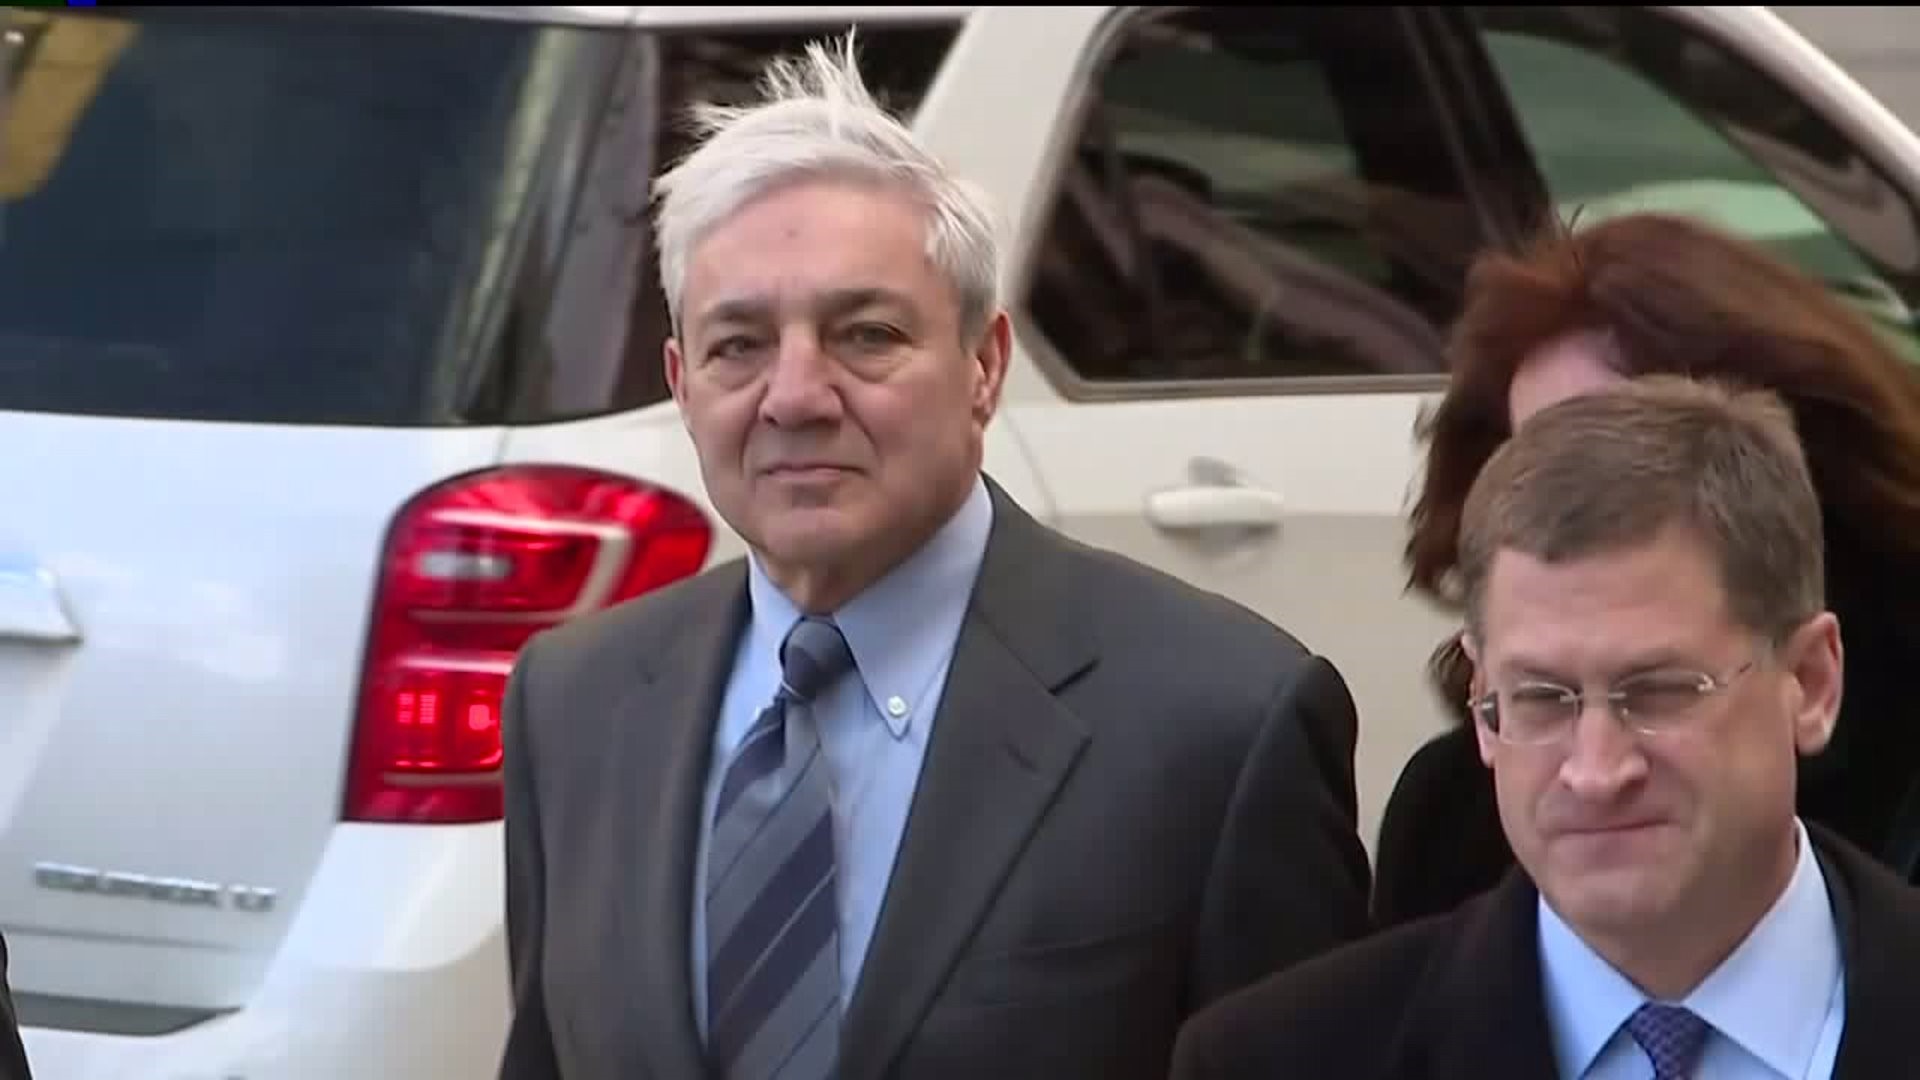 Spanier to Report to Prison Next Month